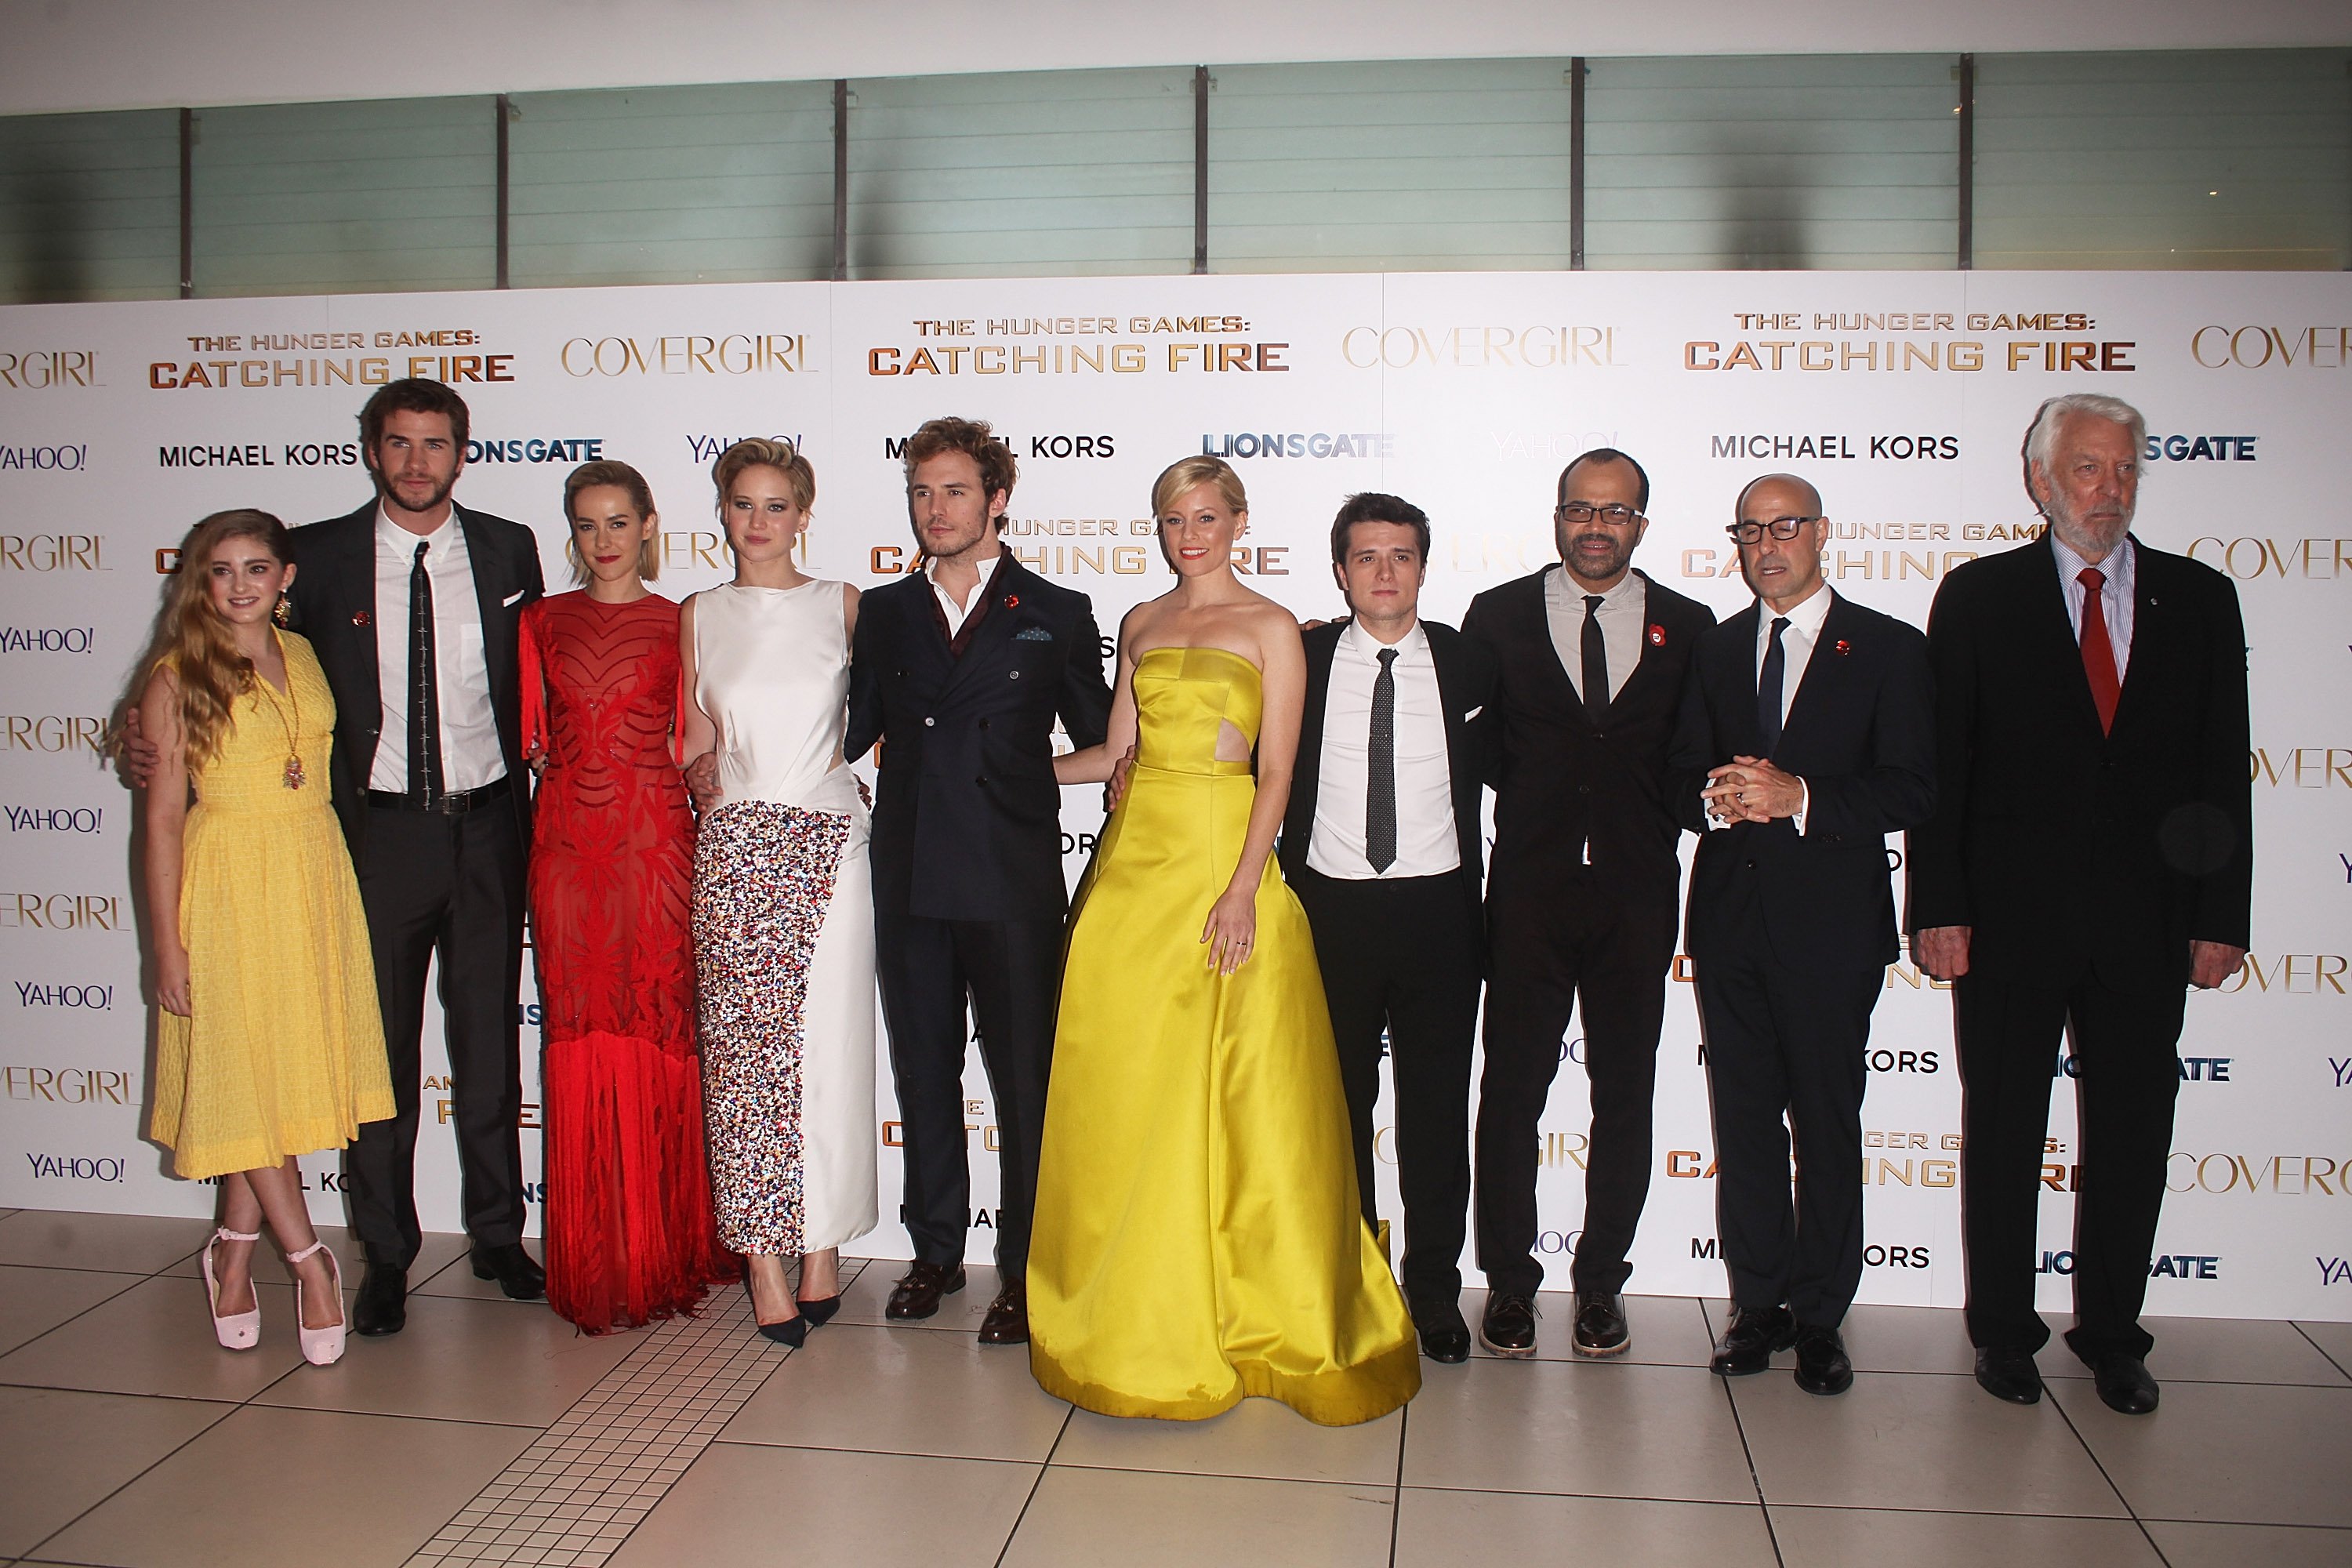 Willow Shield, Liam Hemsworth, Jena Malone, Jennifer Lawrence, Sam Claflin, Elizabeth Banks, Josh Hutcherson, Jeffrey Wright, Stanley Tucci and Donald Sutherland attend the UK Premiere of "The Hunger Games: Catching Fire" on November 11, 2013 in London, England. | Source: Getty Images